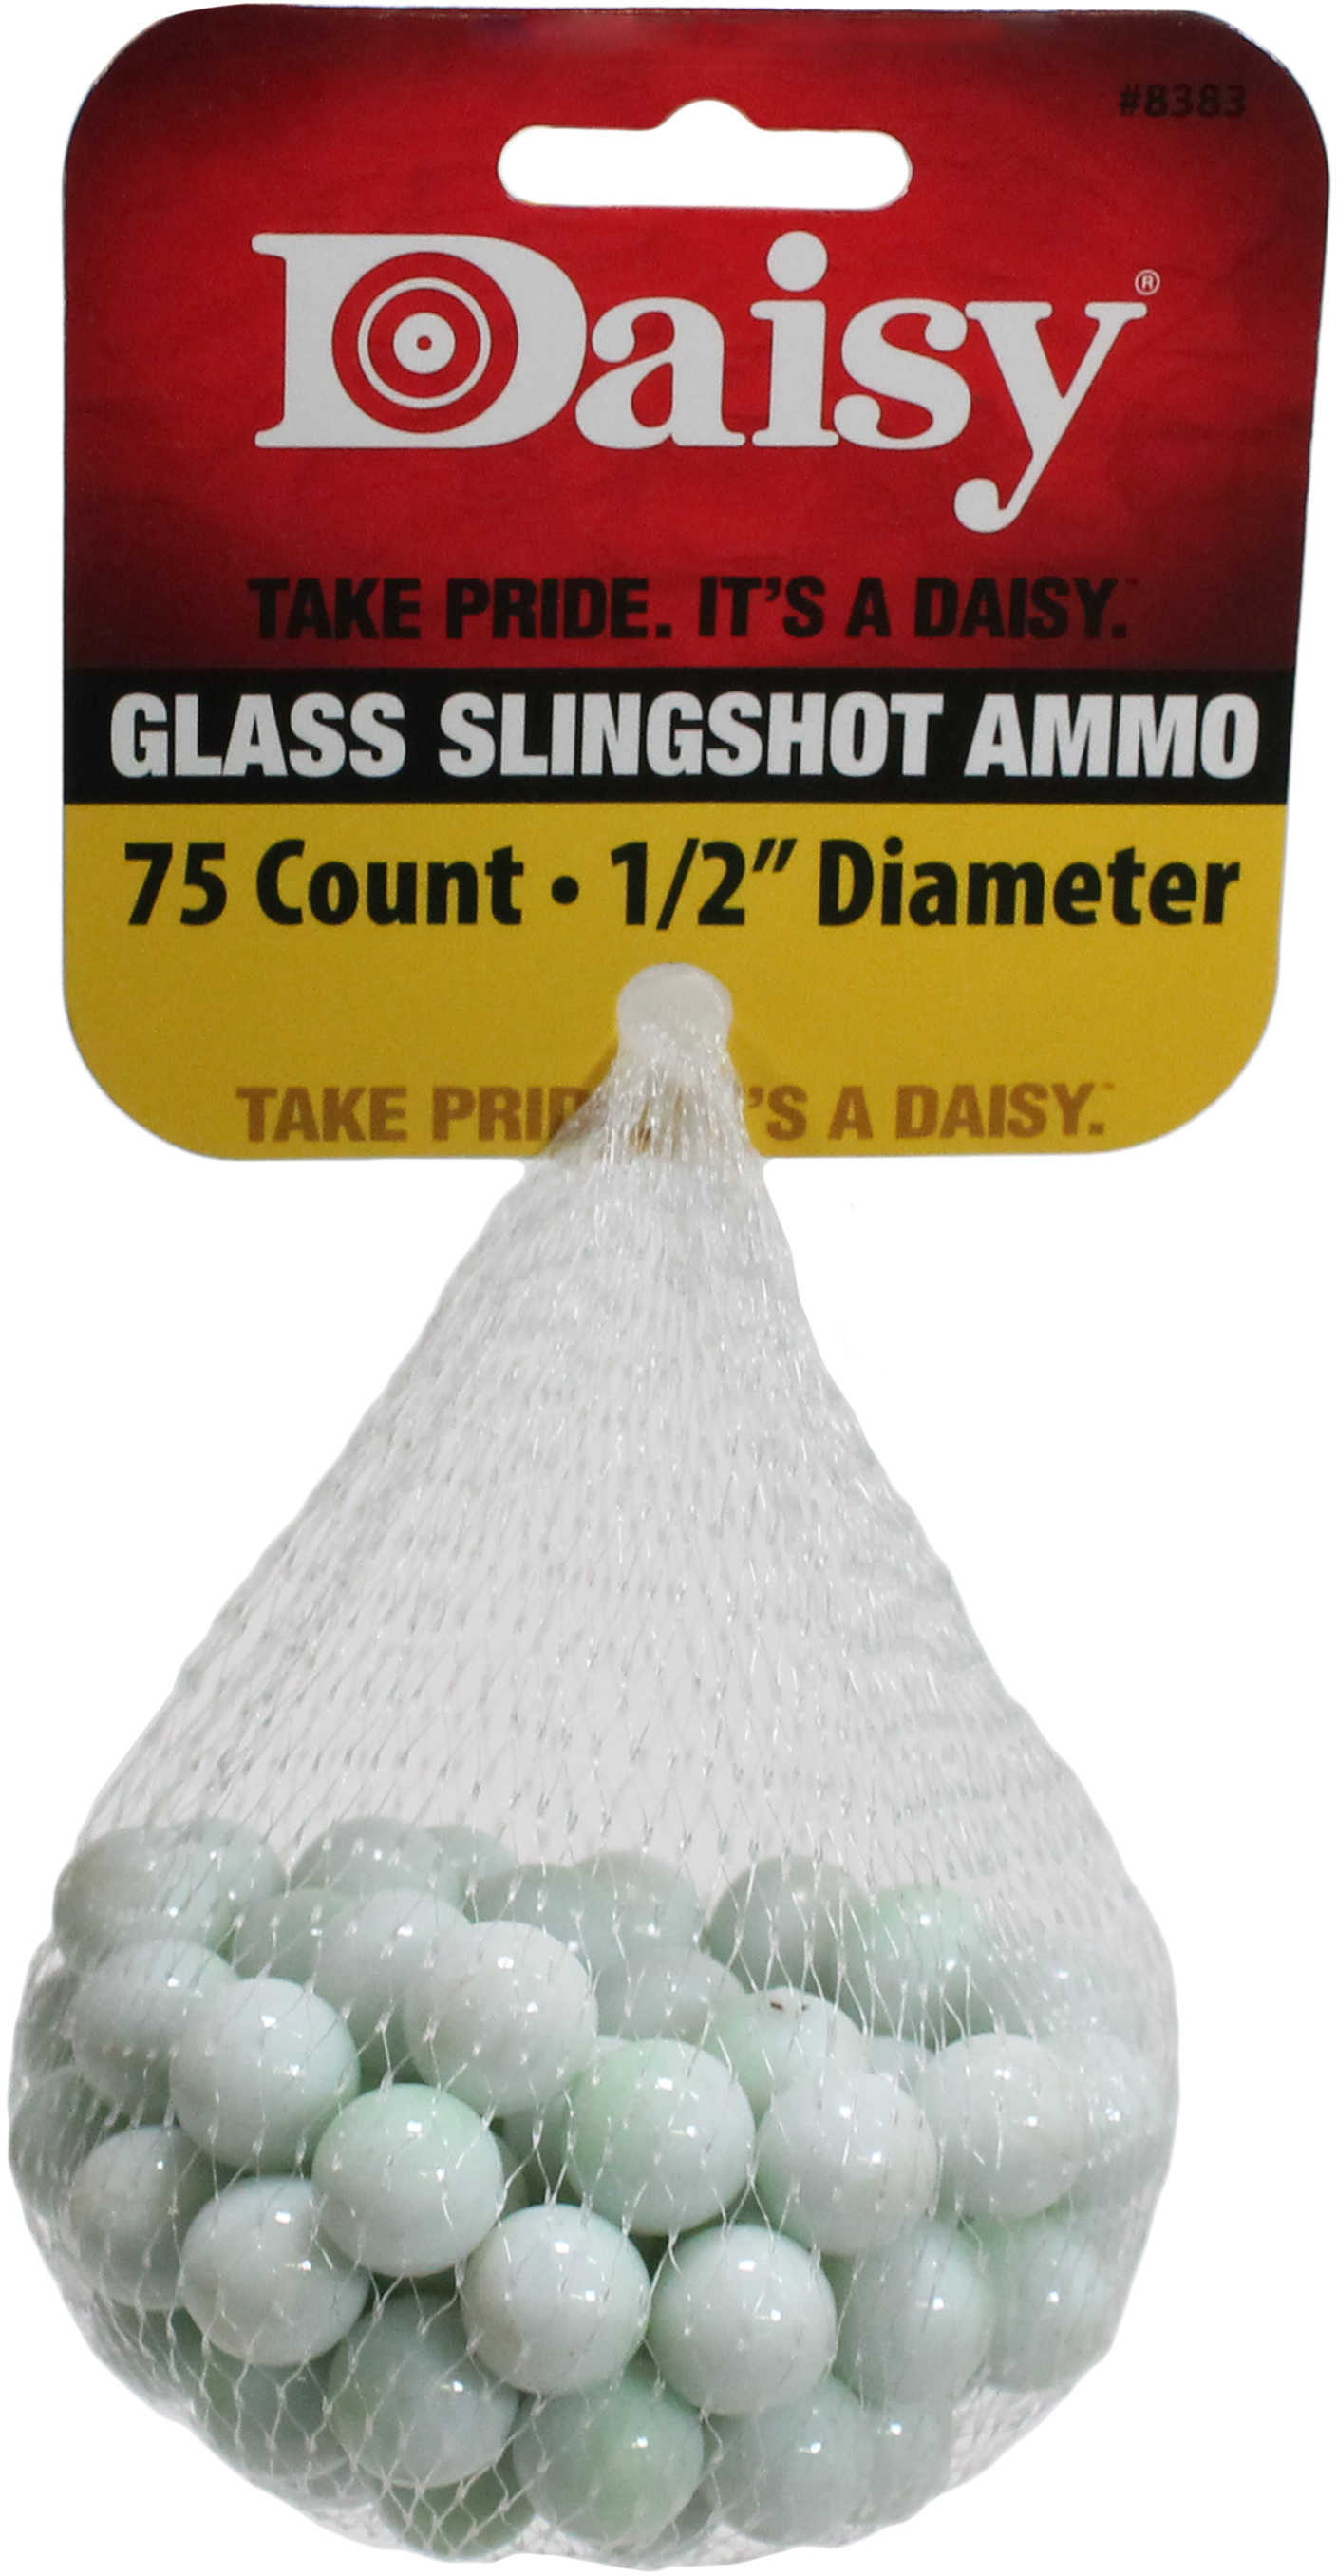 Daisy Outdoor Products Slingshot Ammo 1/2 Glass